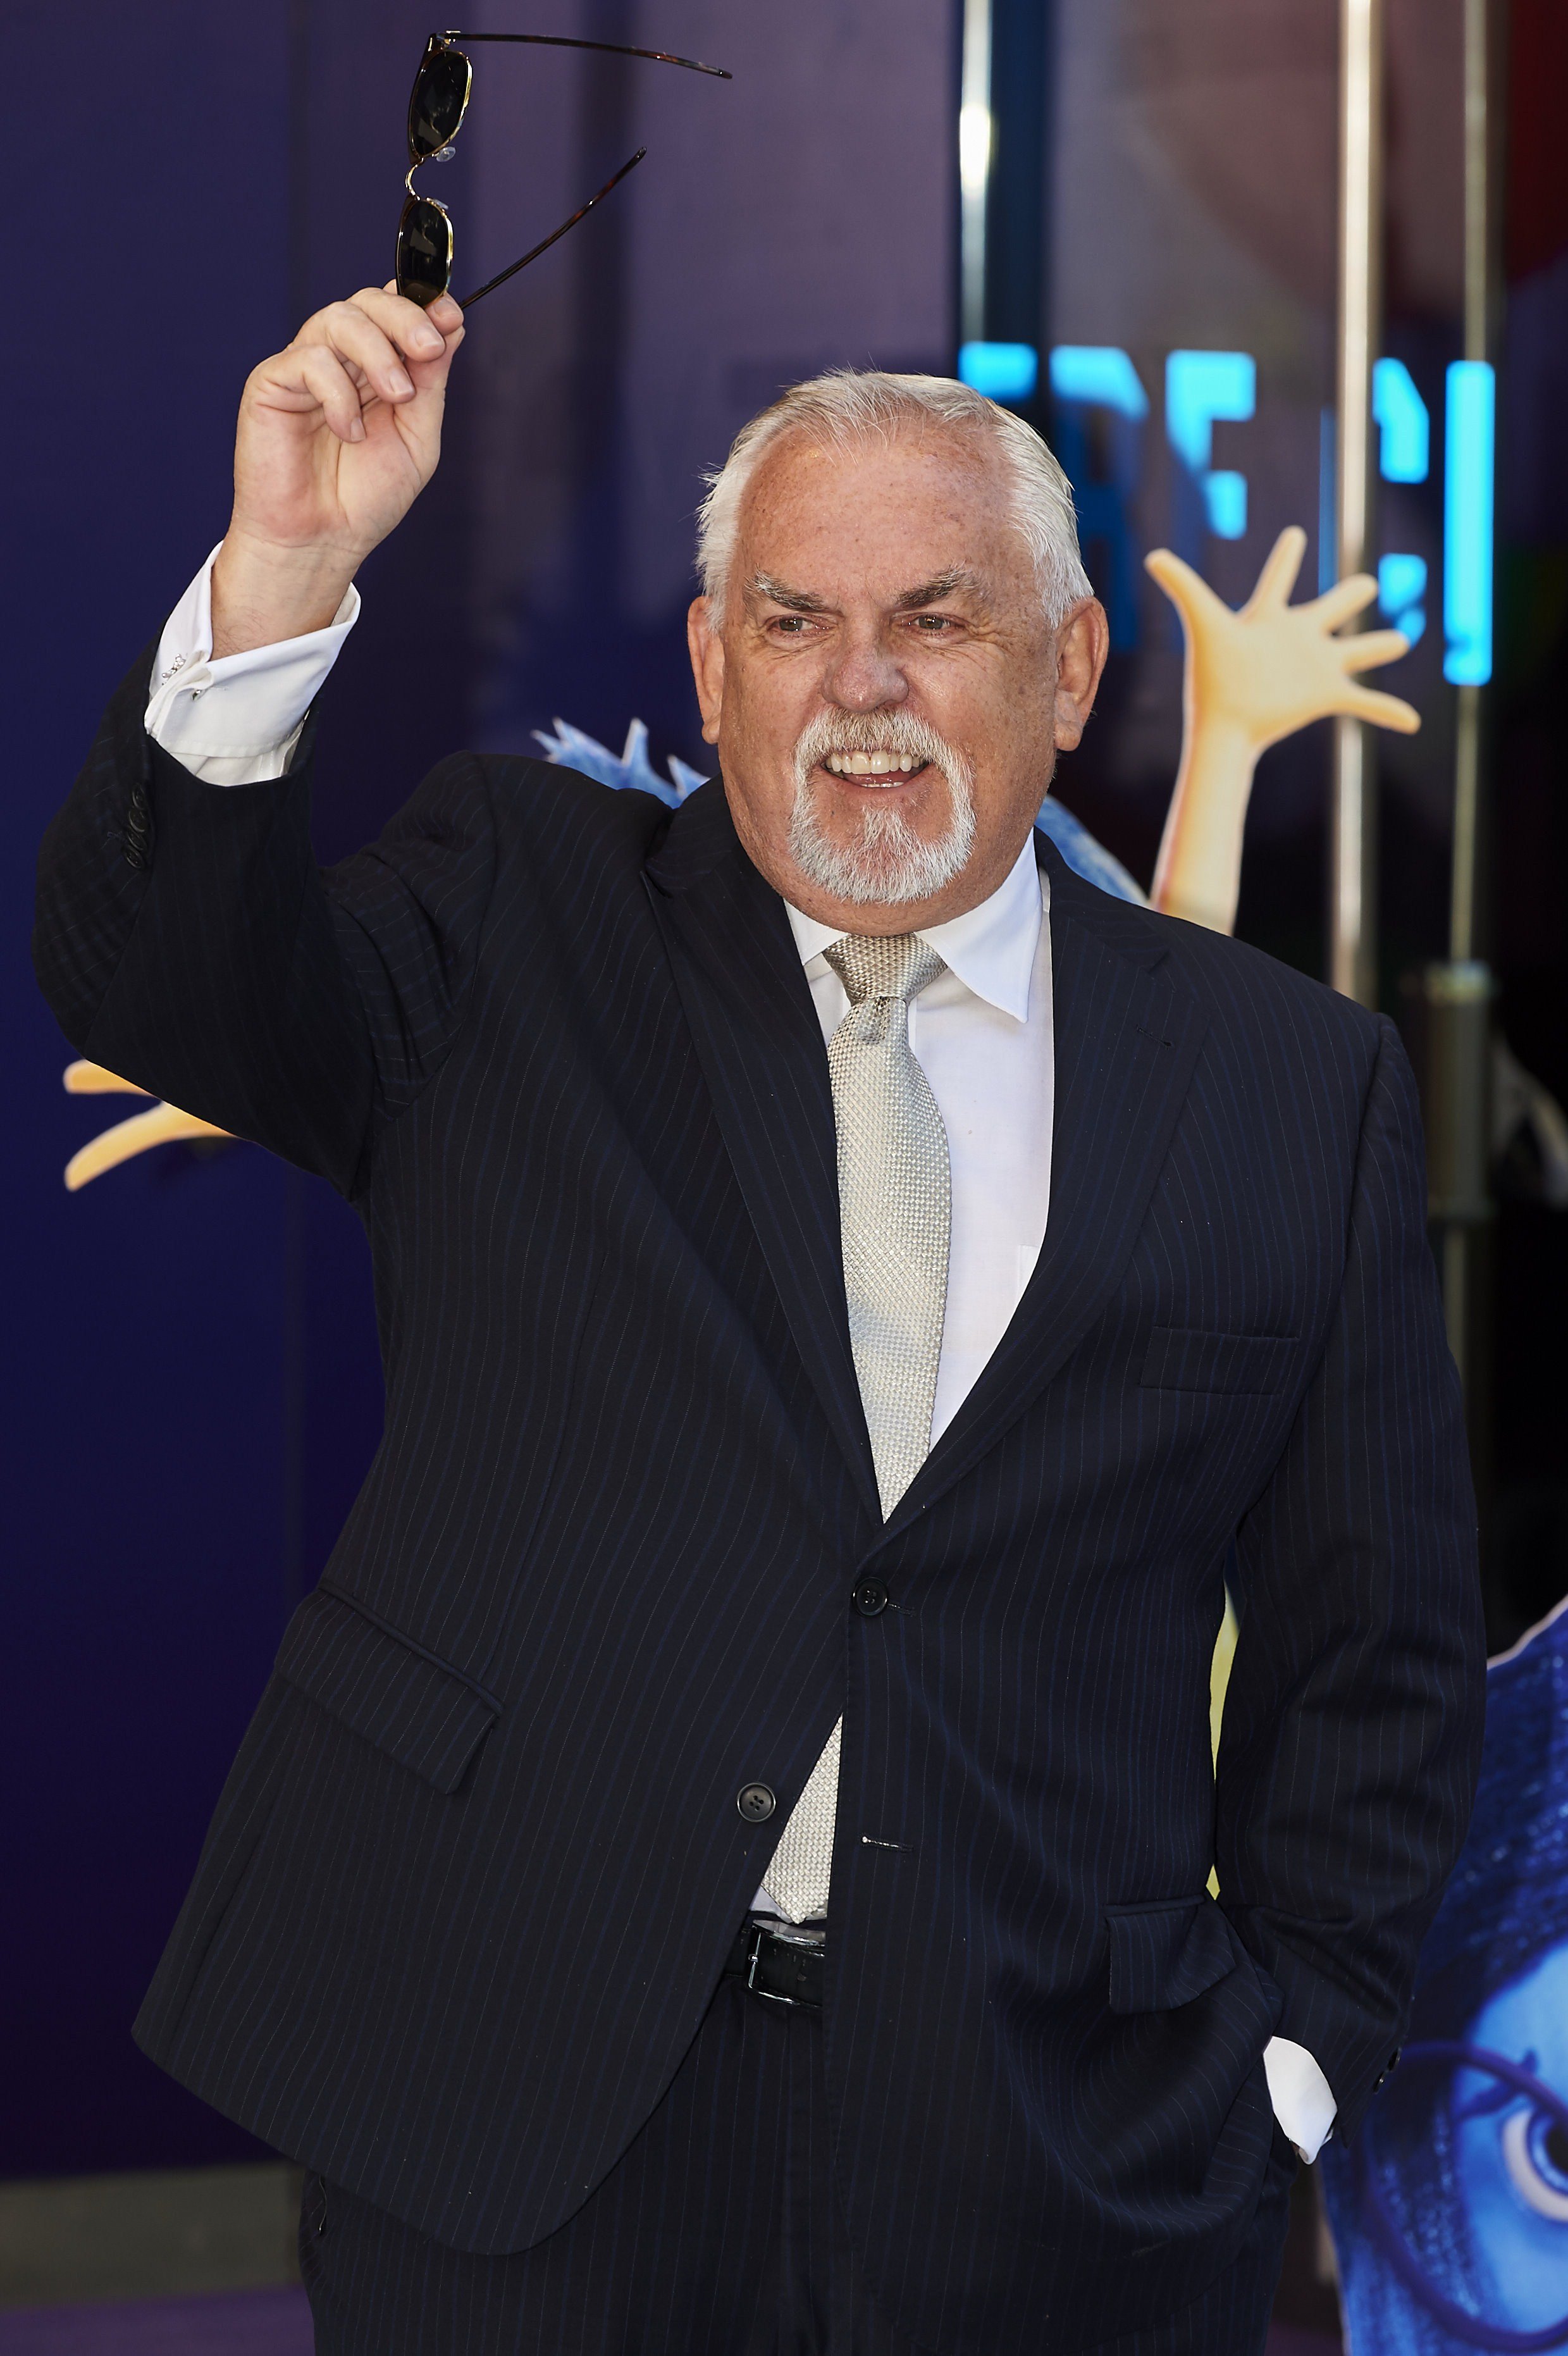 US actor John Ratzenberger poses ahead of a gala screening of the movie Inside Out in central London on July 19, 2015. AFP PHOTO / NIKLAS HALLE'N (Photo credit should read NIKLAS HALLE'N/AFP/Getty Images)